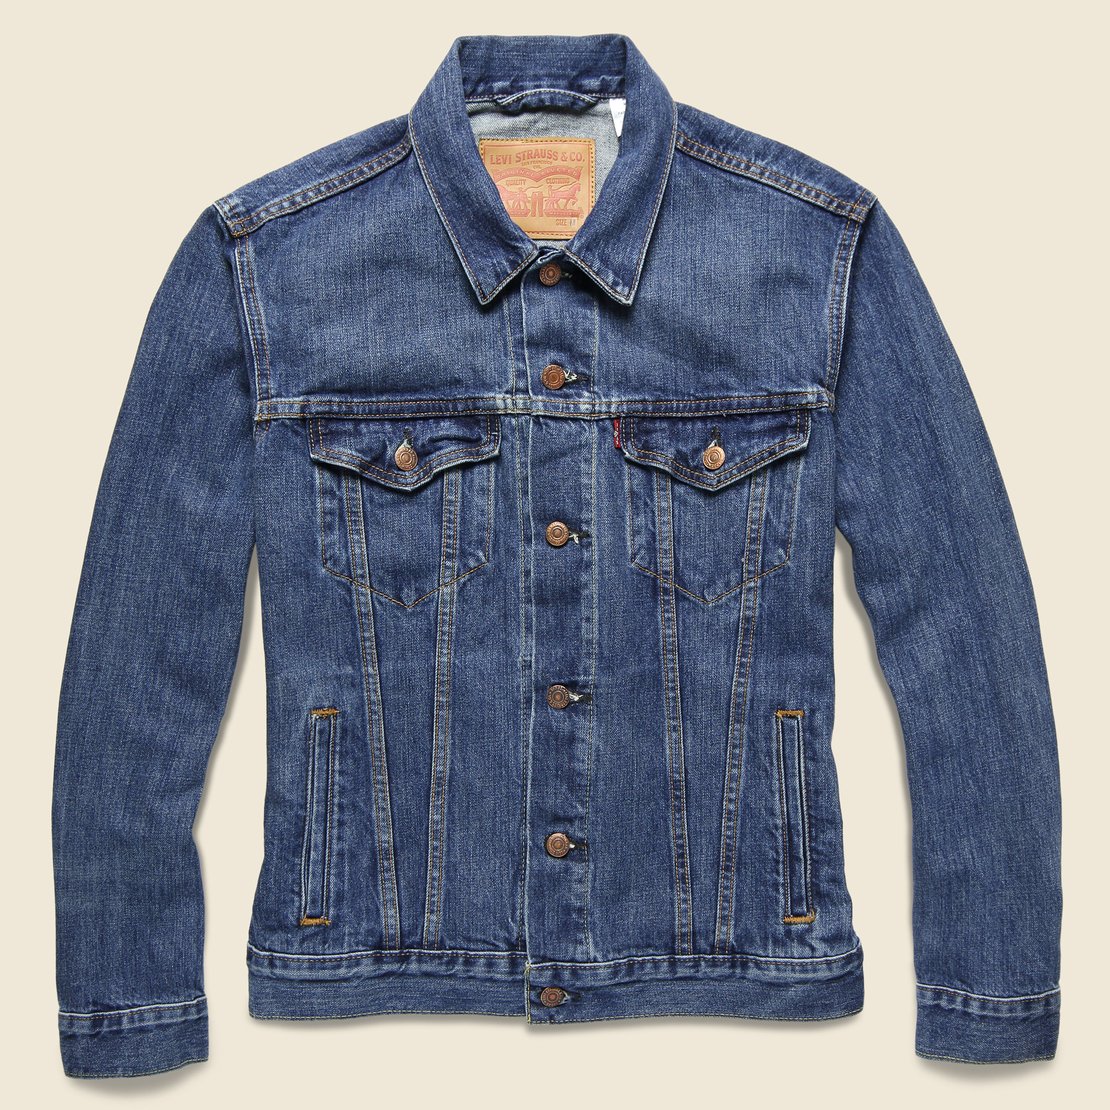 Levi's Denim Trucker - Fuck Luck - Size Medium - Fort Lonesome - STAG Provisions - Outerwear - Coat / Jacket